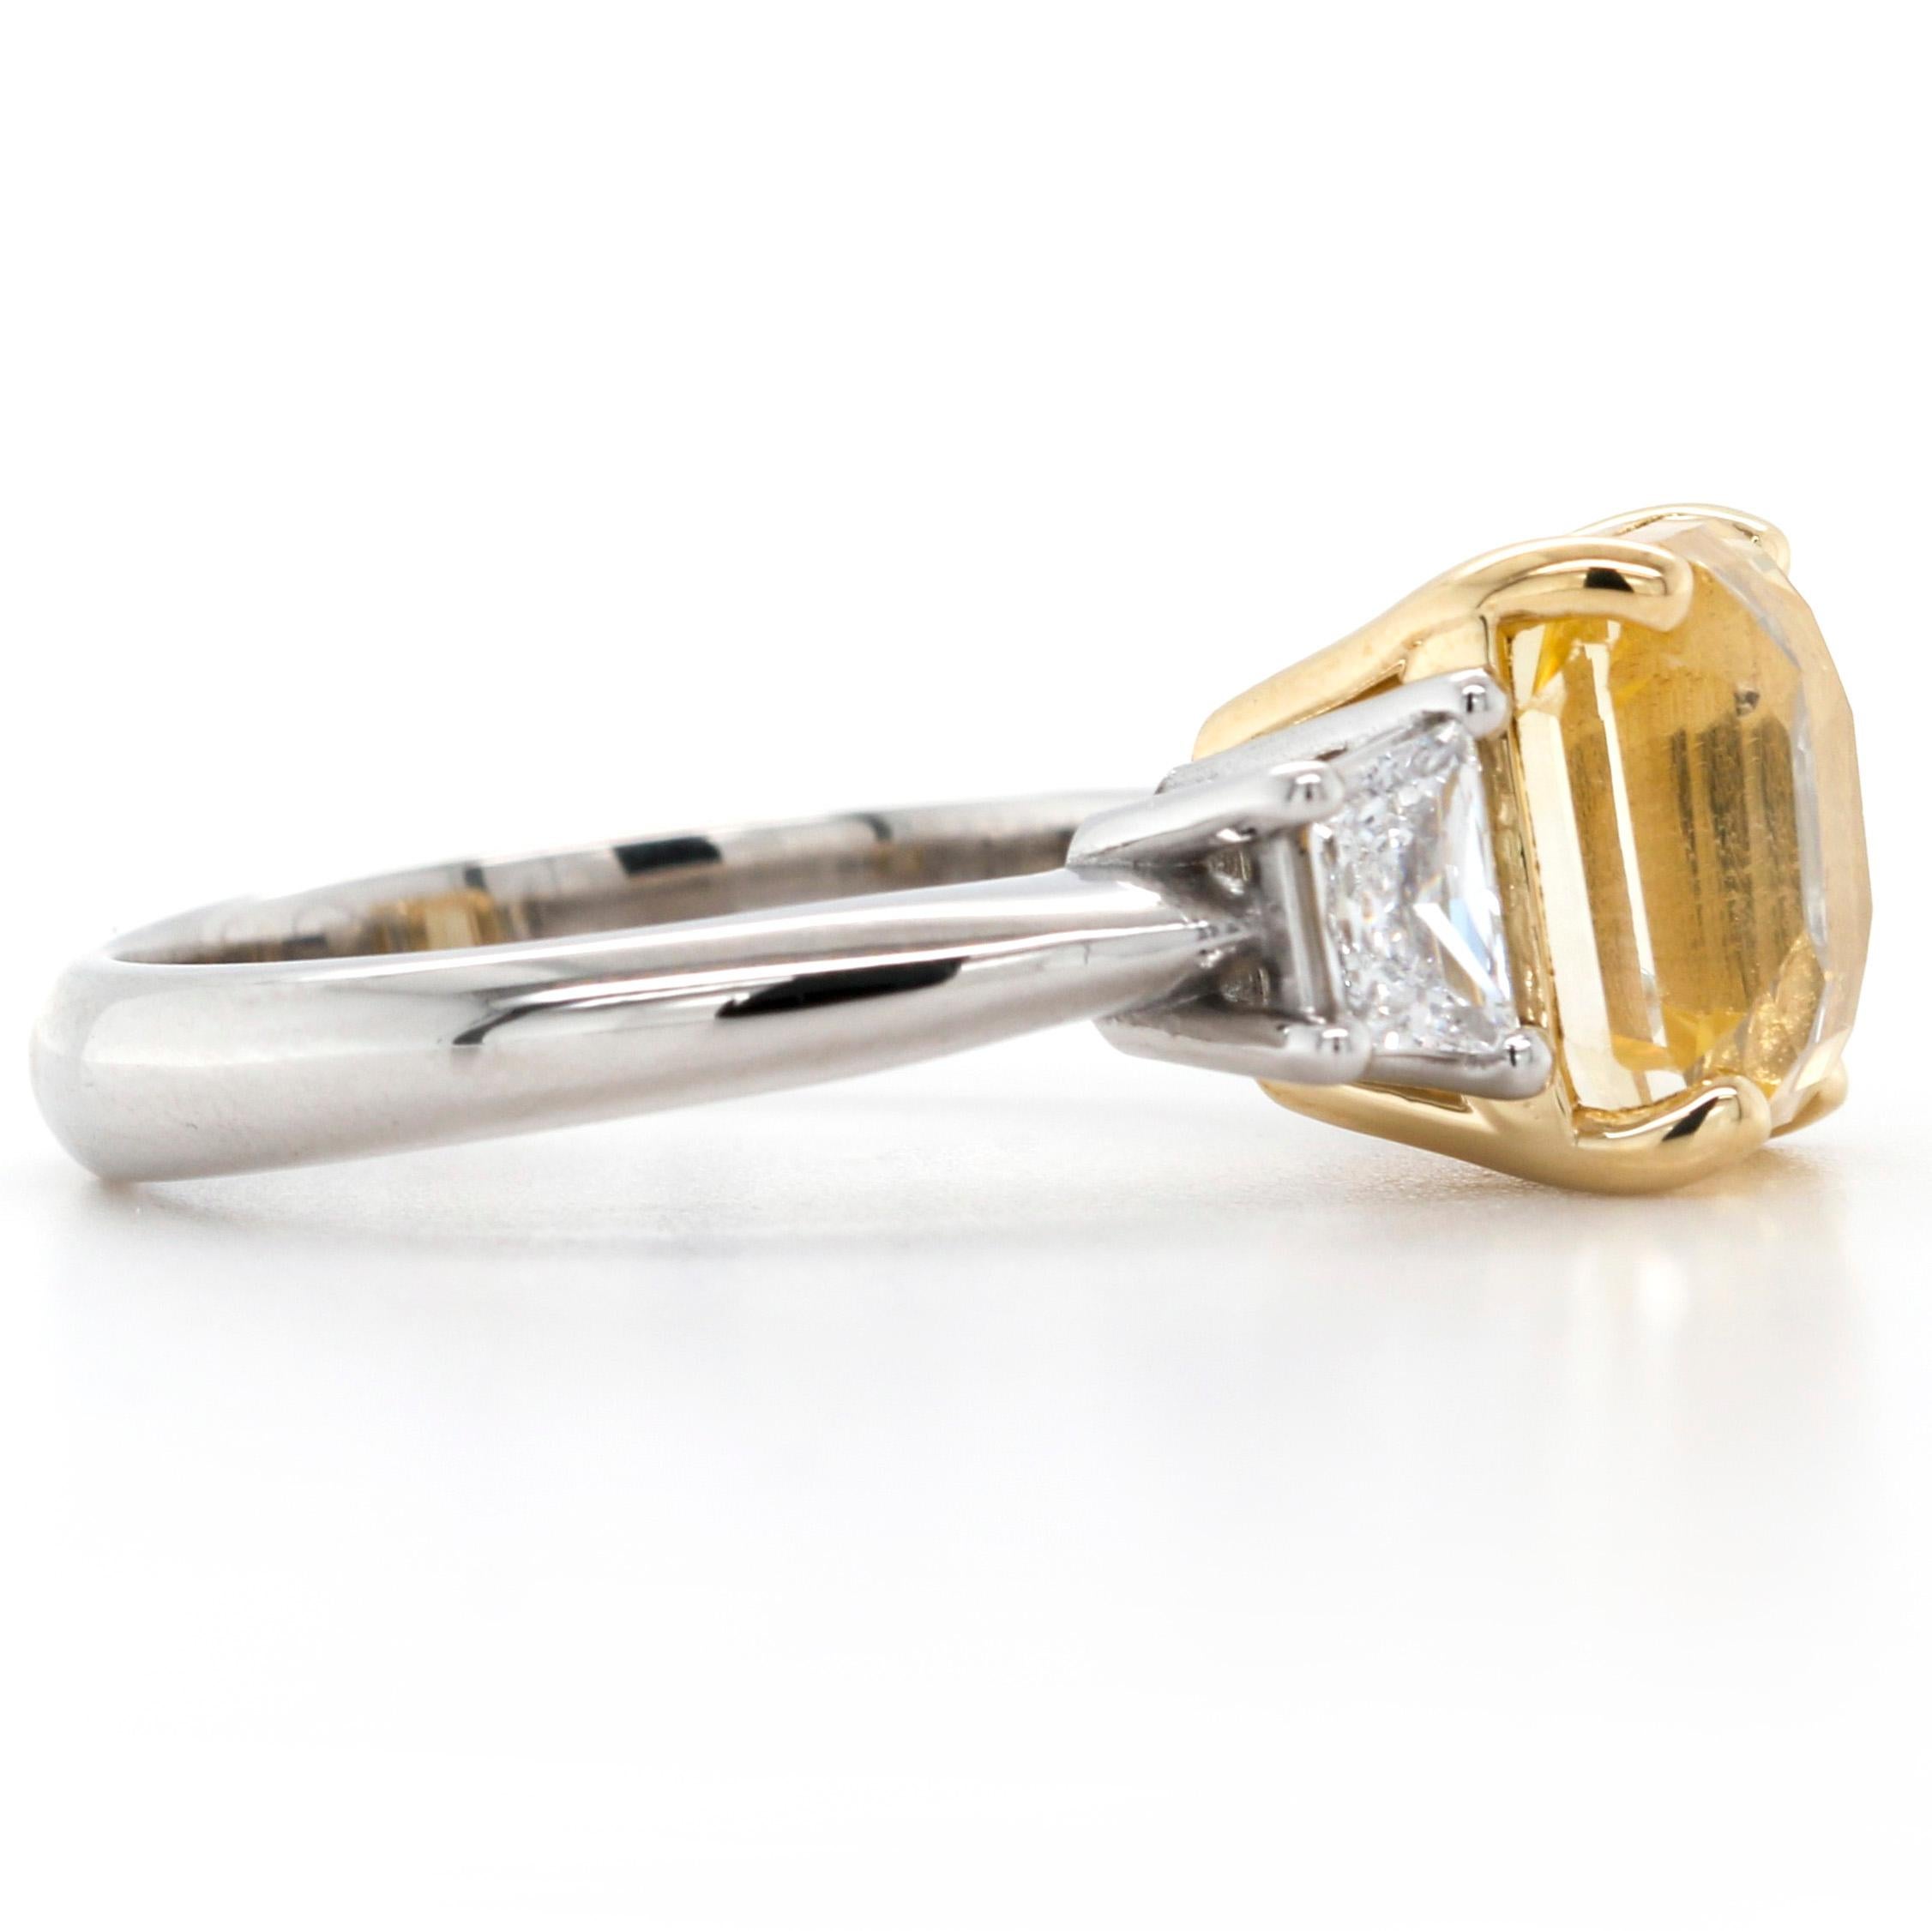 Contemporary GIA No Heat 5.59 Carat Yellow Sapphire and Diamond Ring in 18k White Gold For Sale